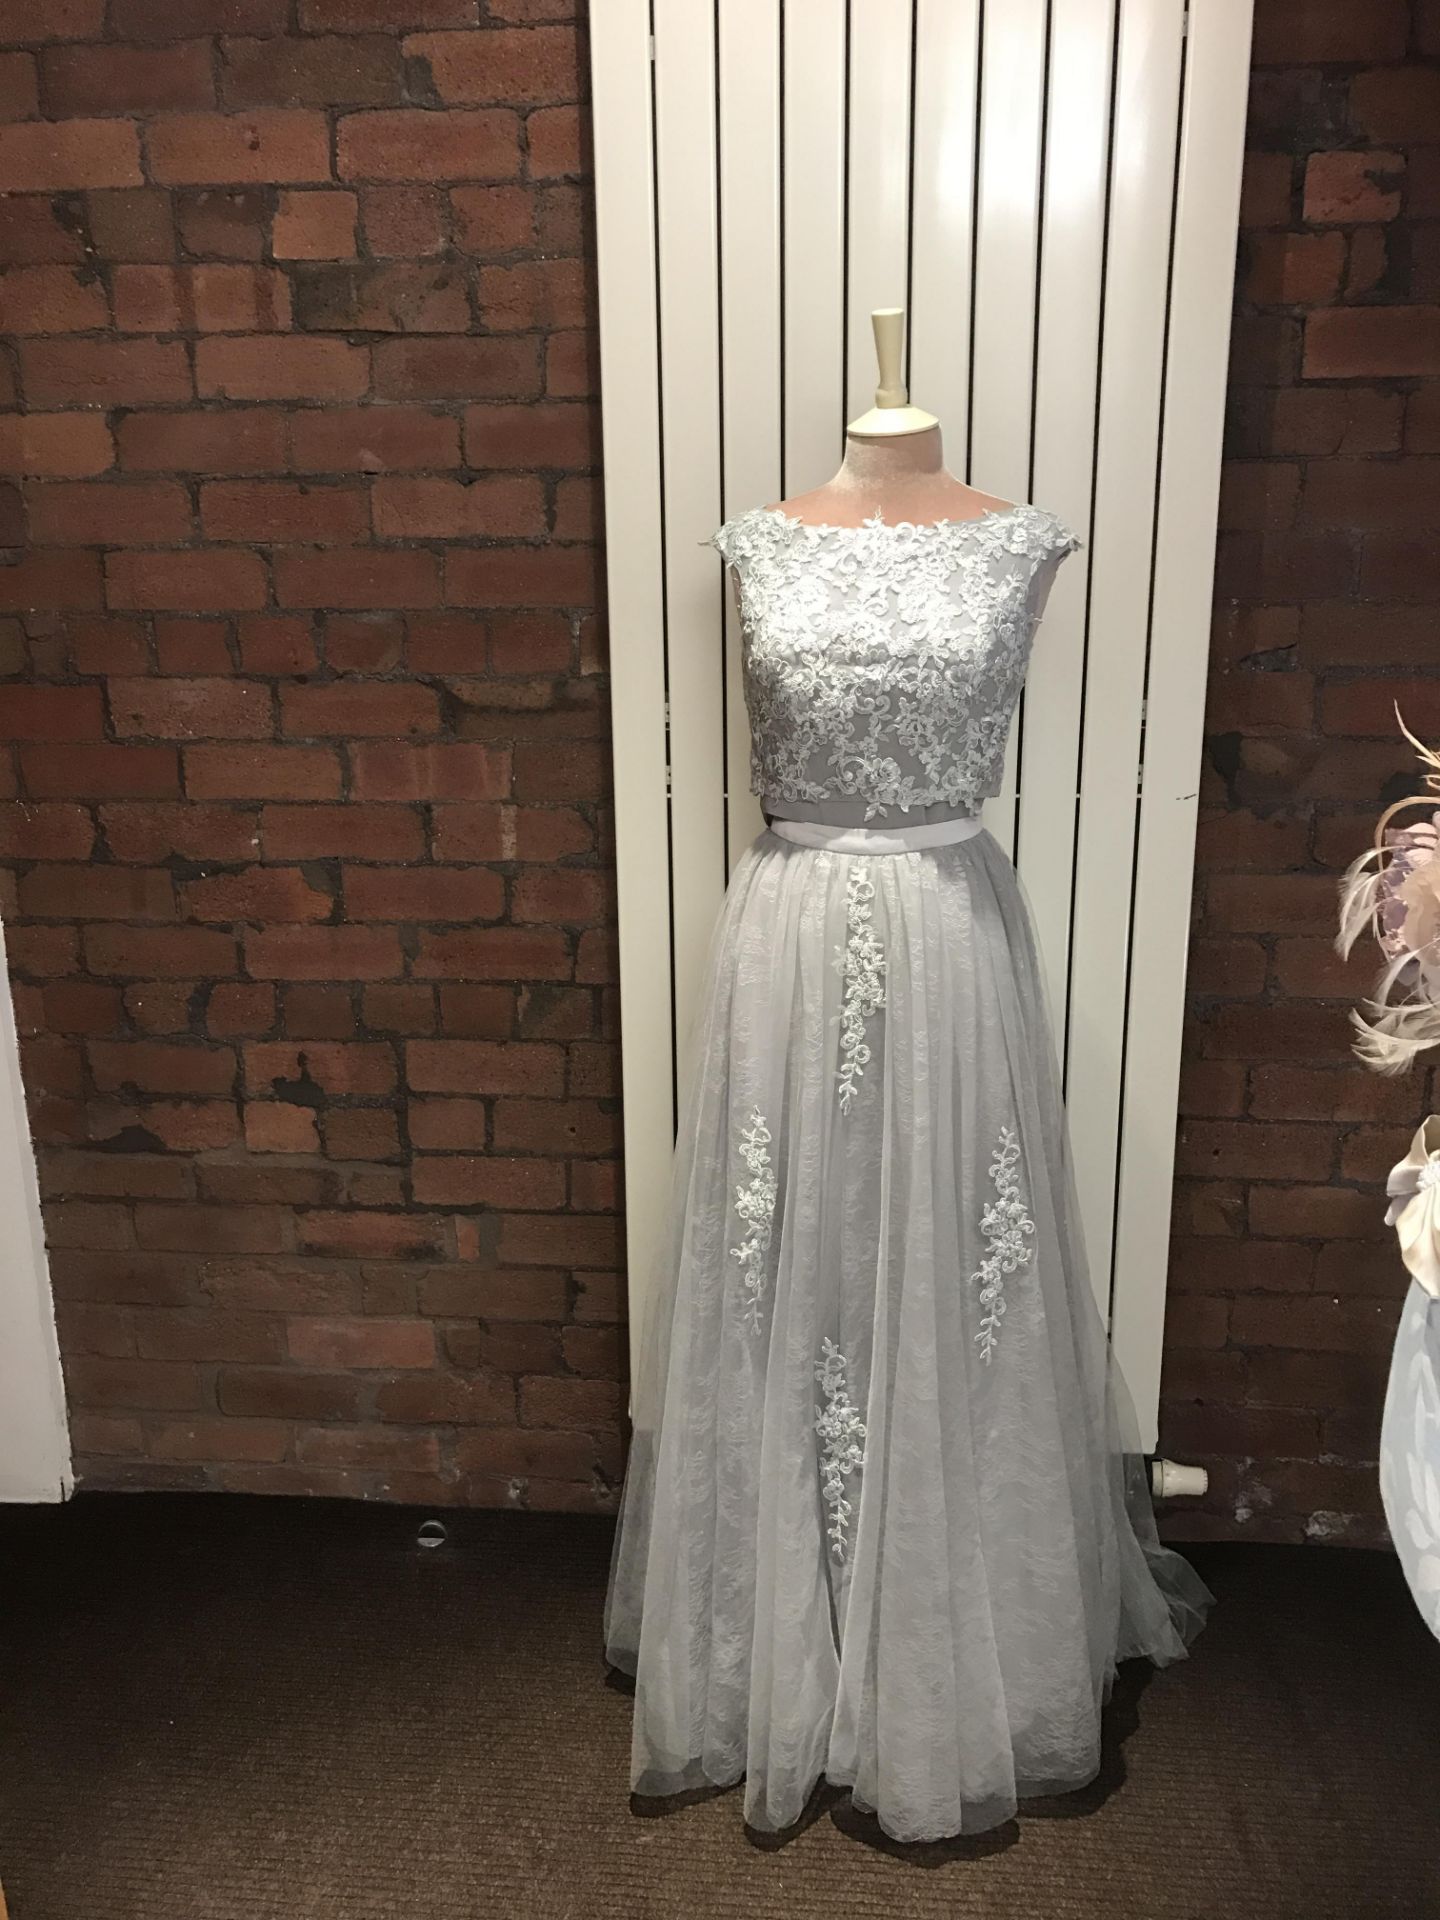 New Full Length Vintage Inspired Lace with Fishtail Bridesmaid/Occasional Skirt in Grey size 14.